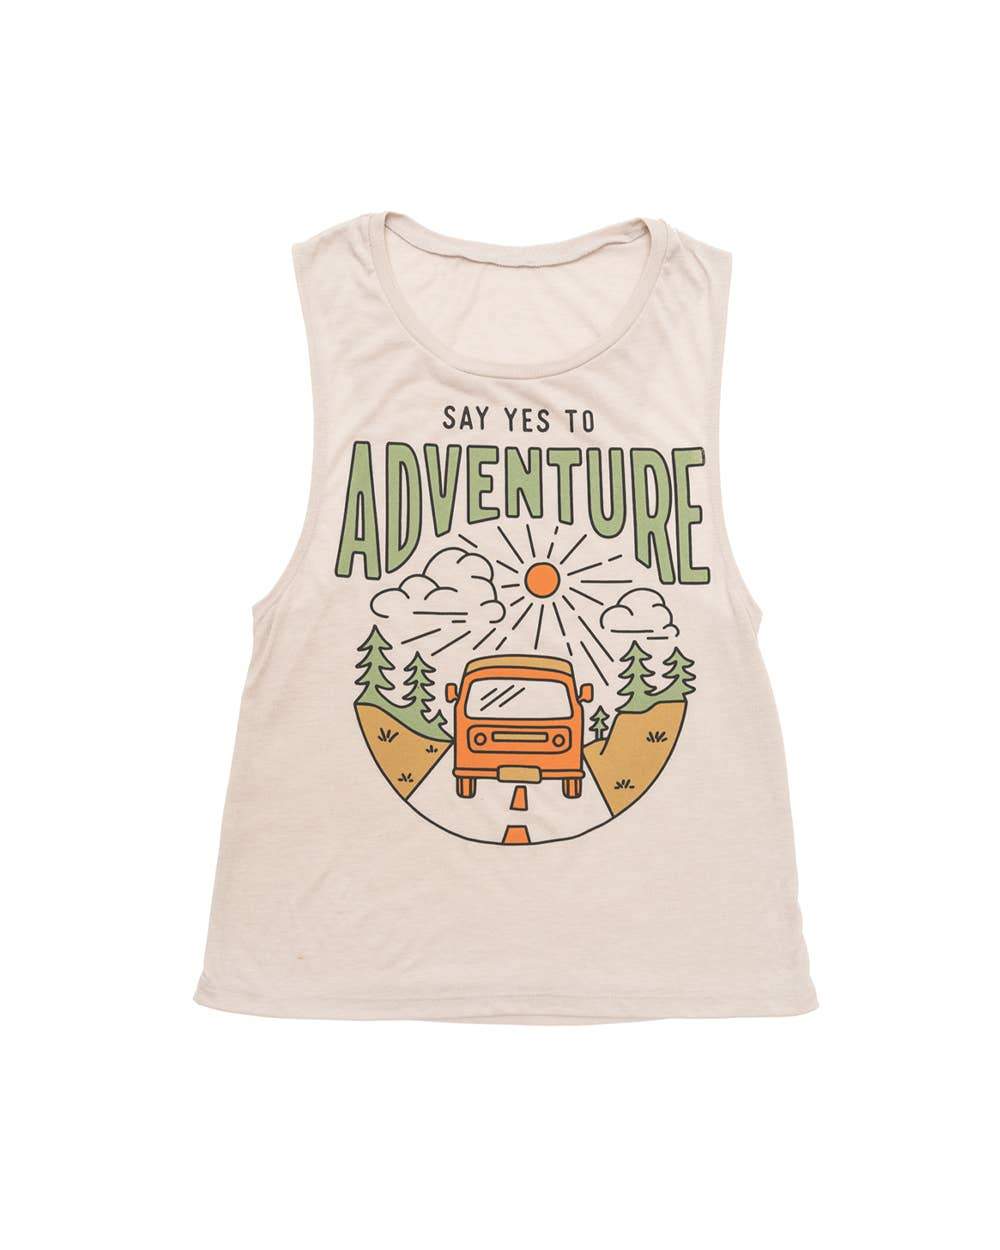 Say Yes To Adventure Women's Muscle Tank